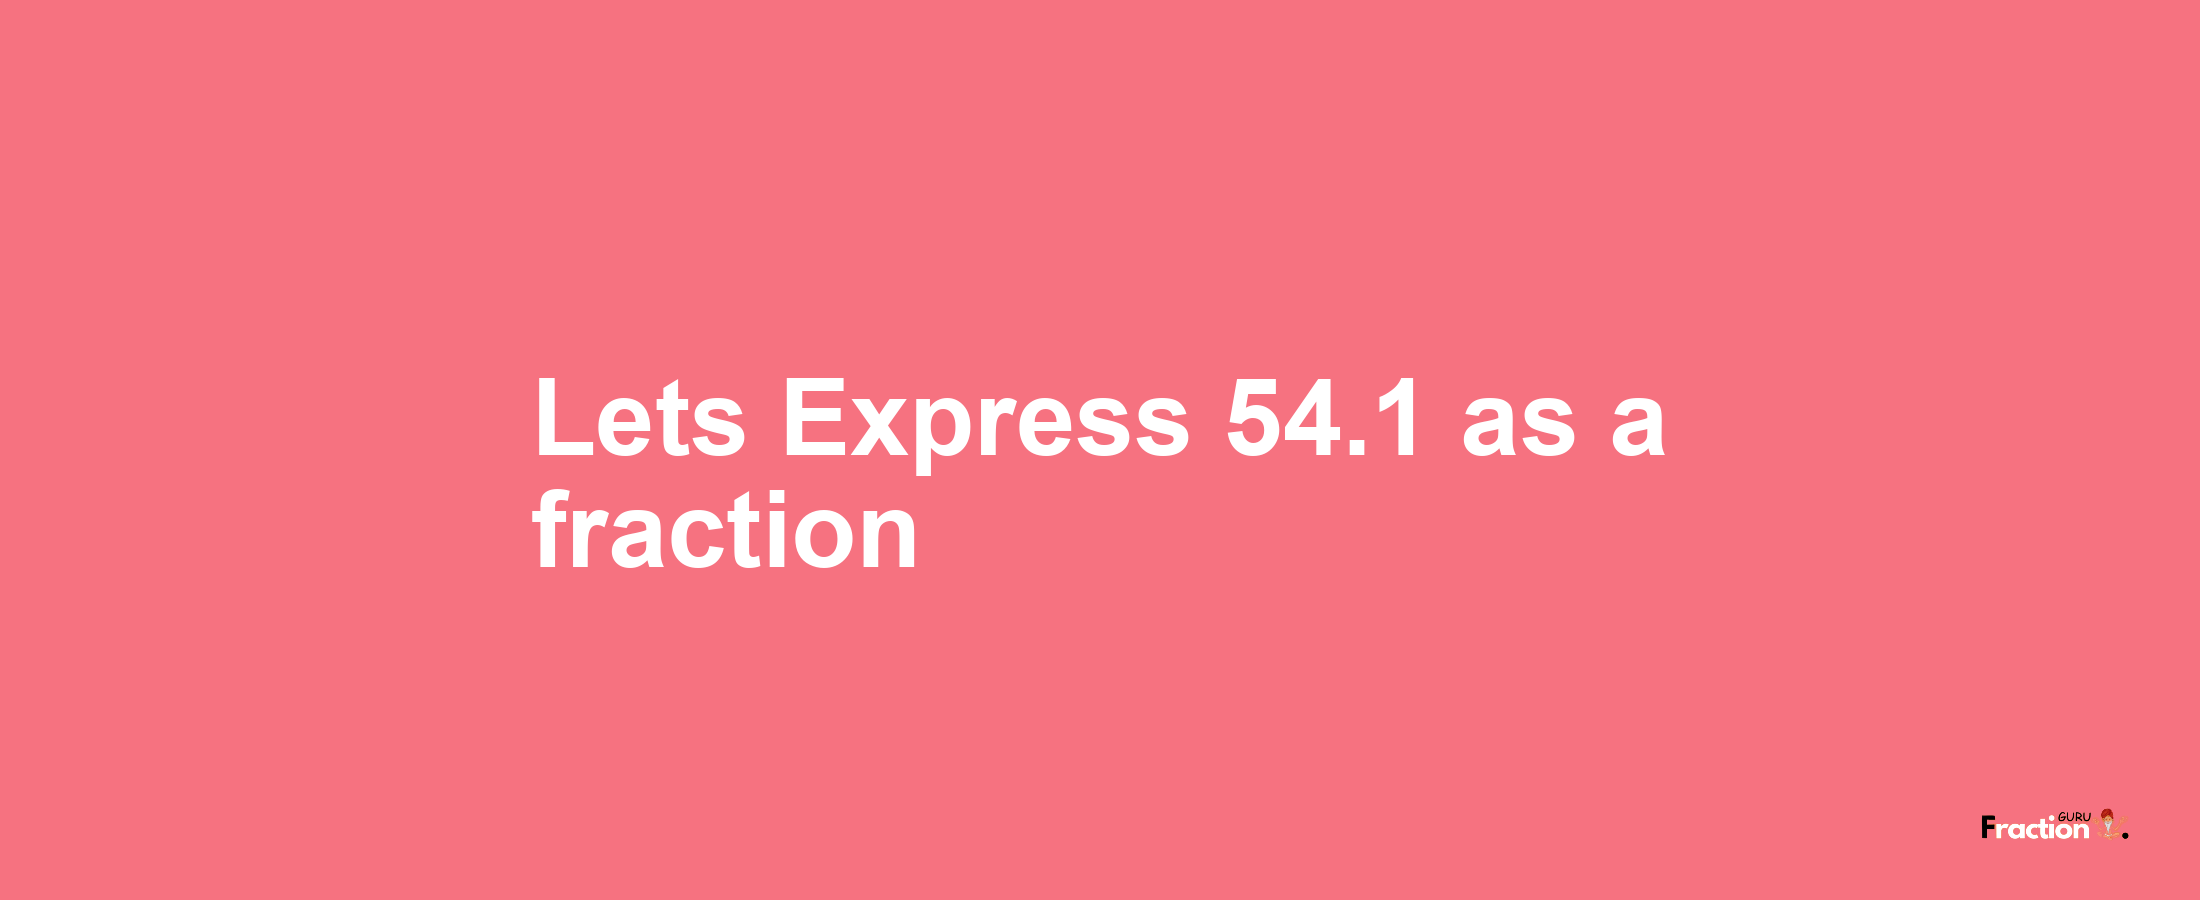 Lets Express 54.1 as afraction